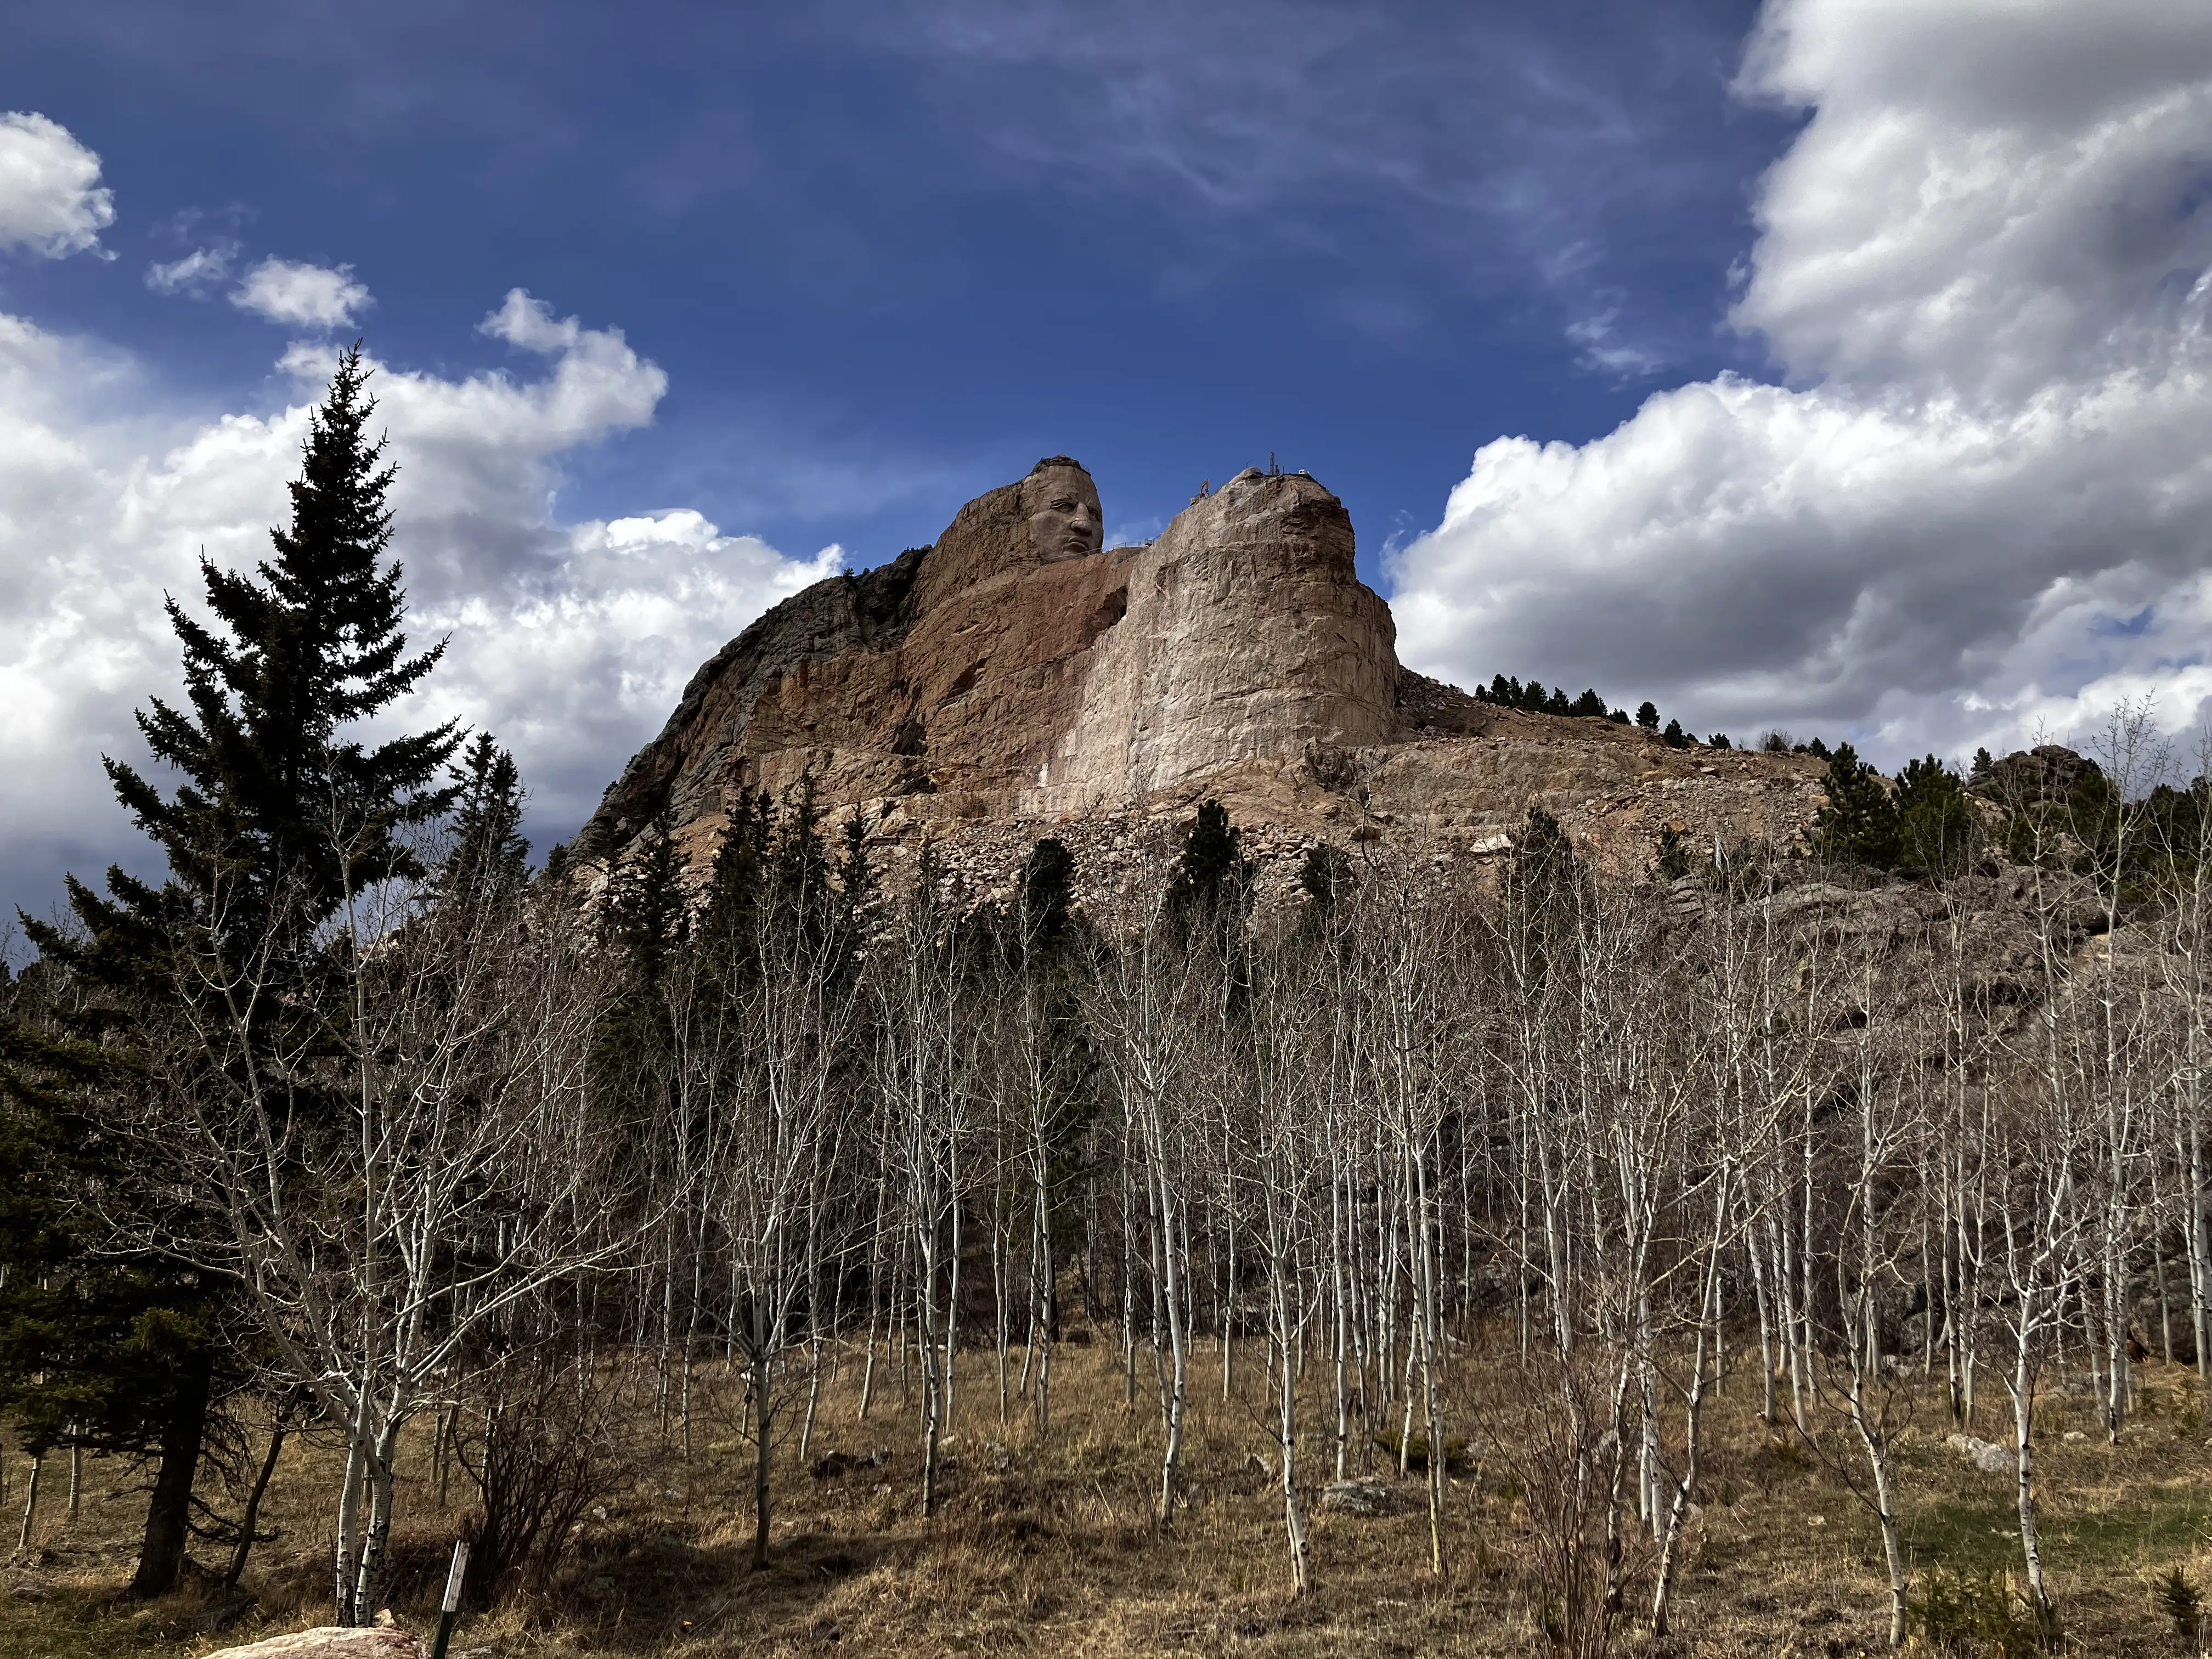 The Crazy Horse granite mountain carving.